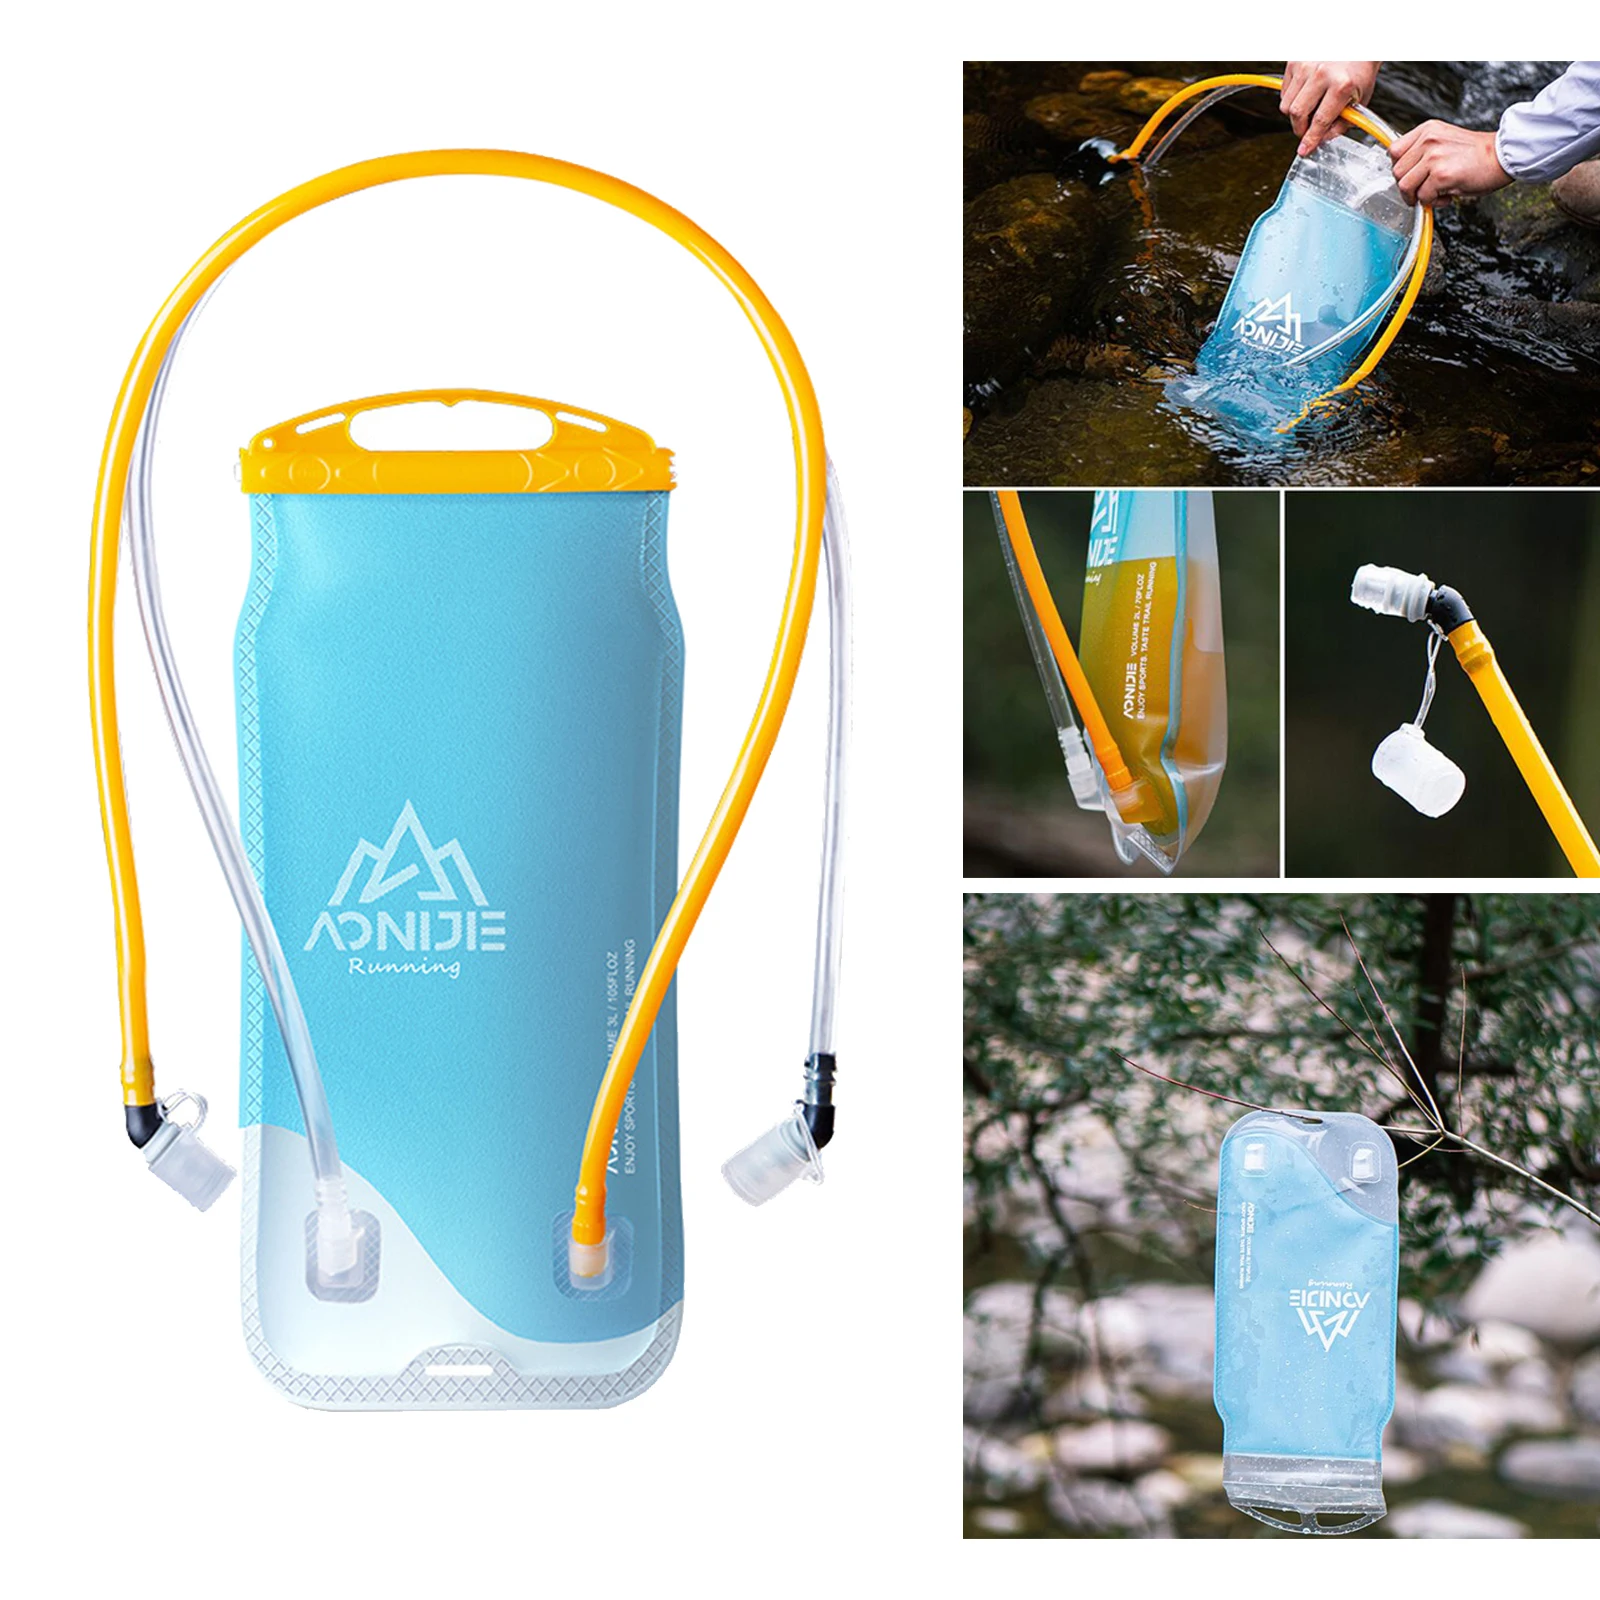 Dual Hydration Bladder, Replacement Reservoir for Most Backpacks, Carry Water and Electrolytes